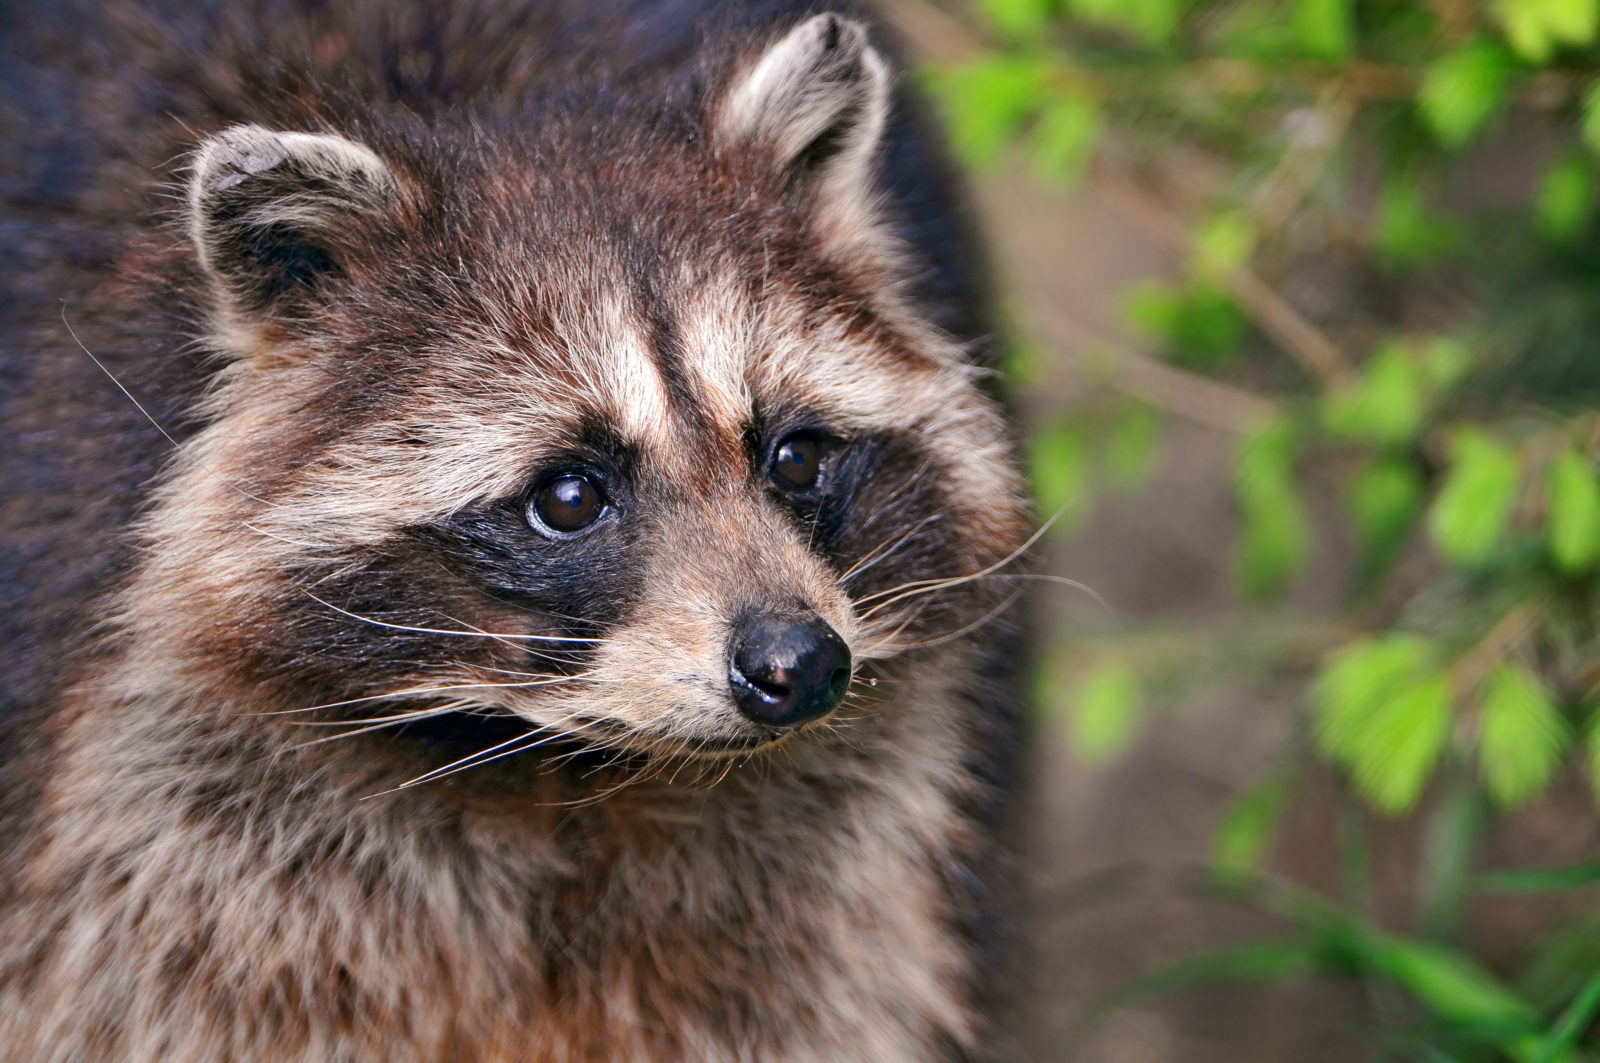 effective ways to scare raccoons away expert tips and tricks